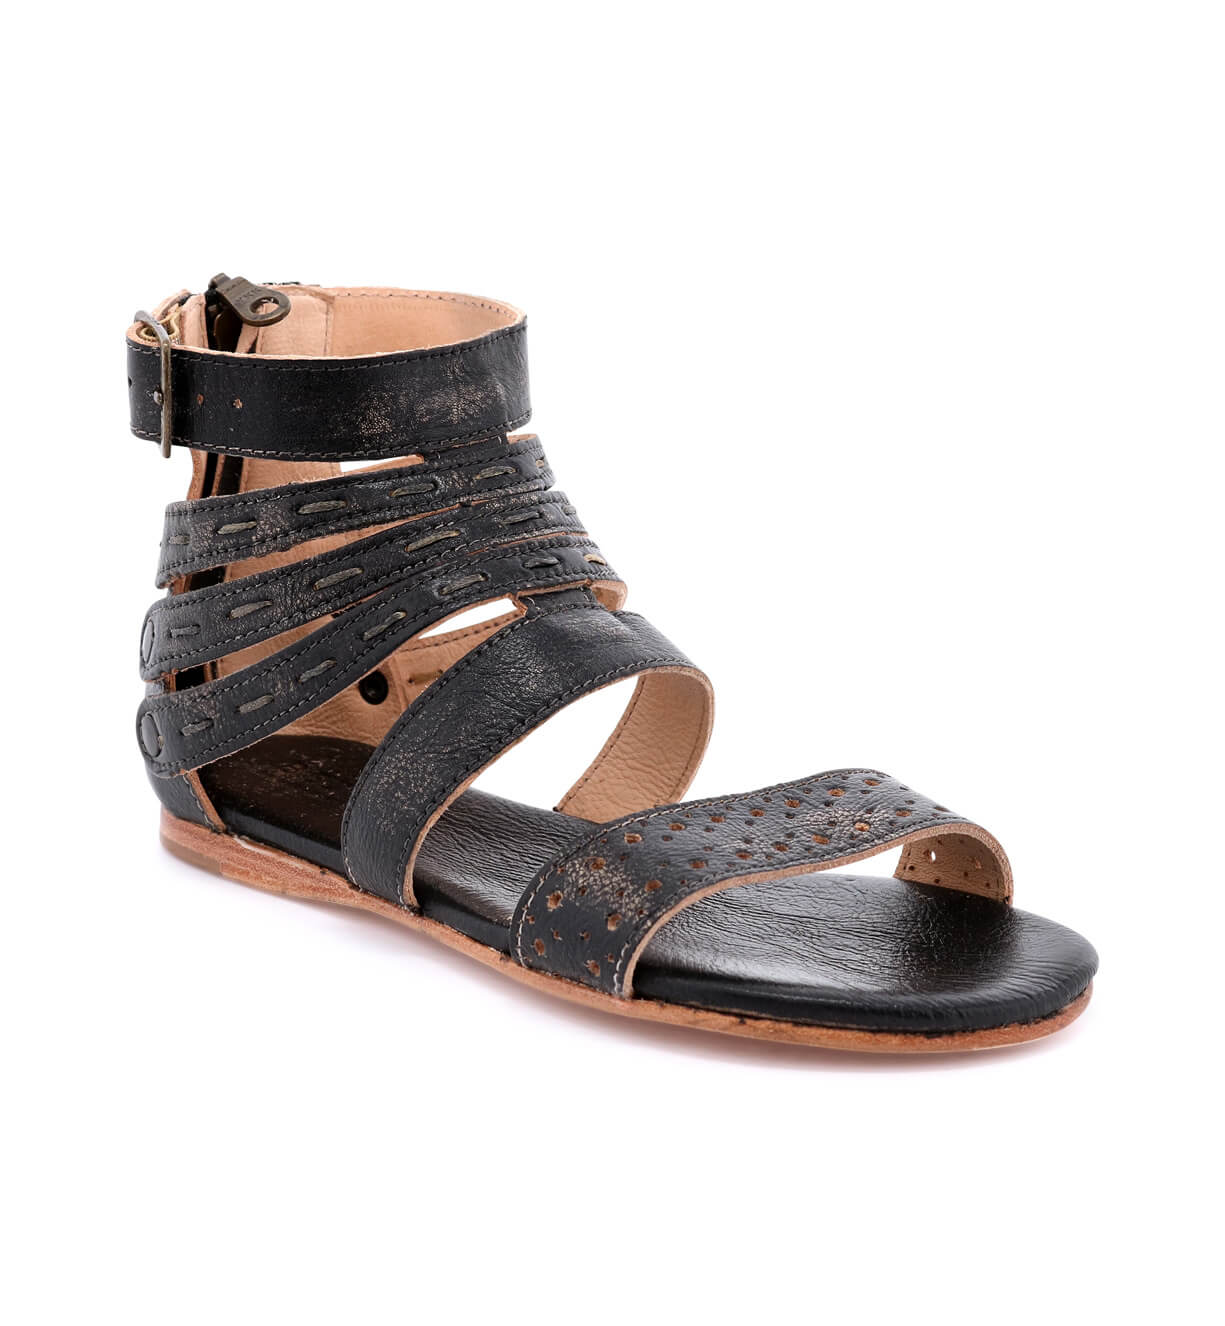 An Artemis gladiator sandal by Bed Stu for women, with straps and buckles.